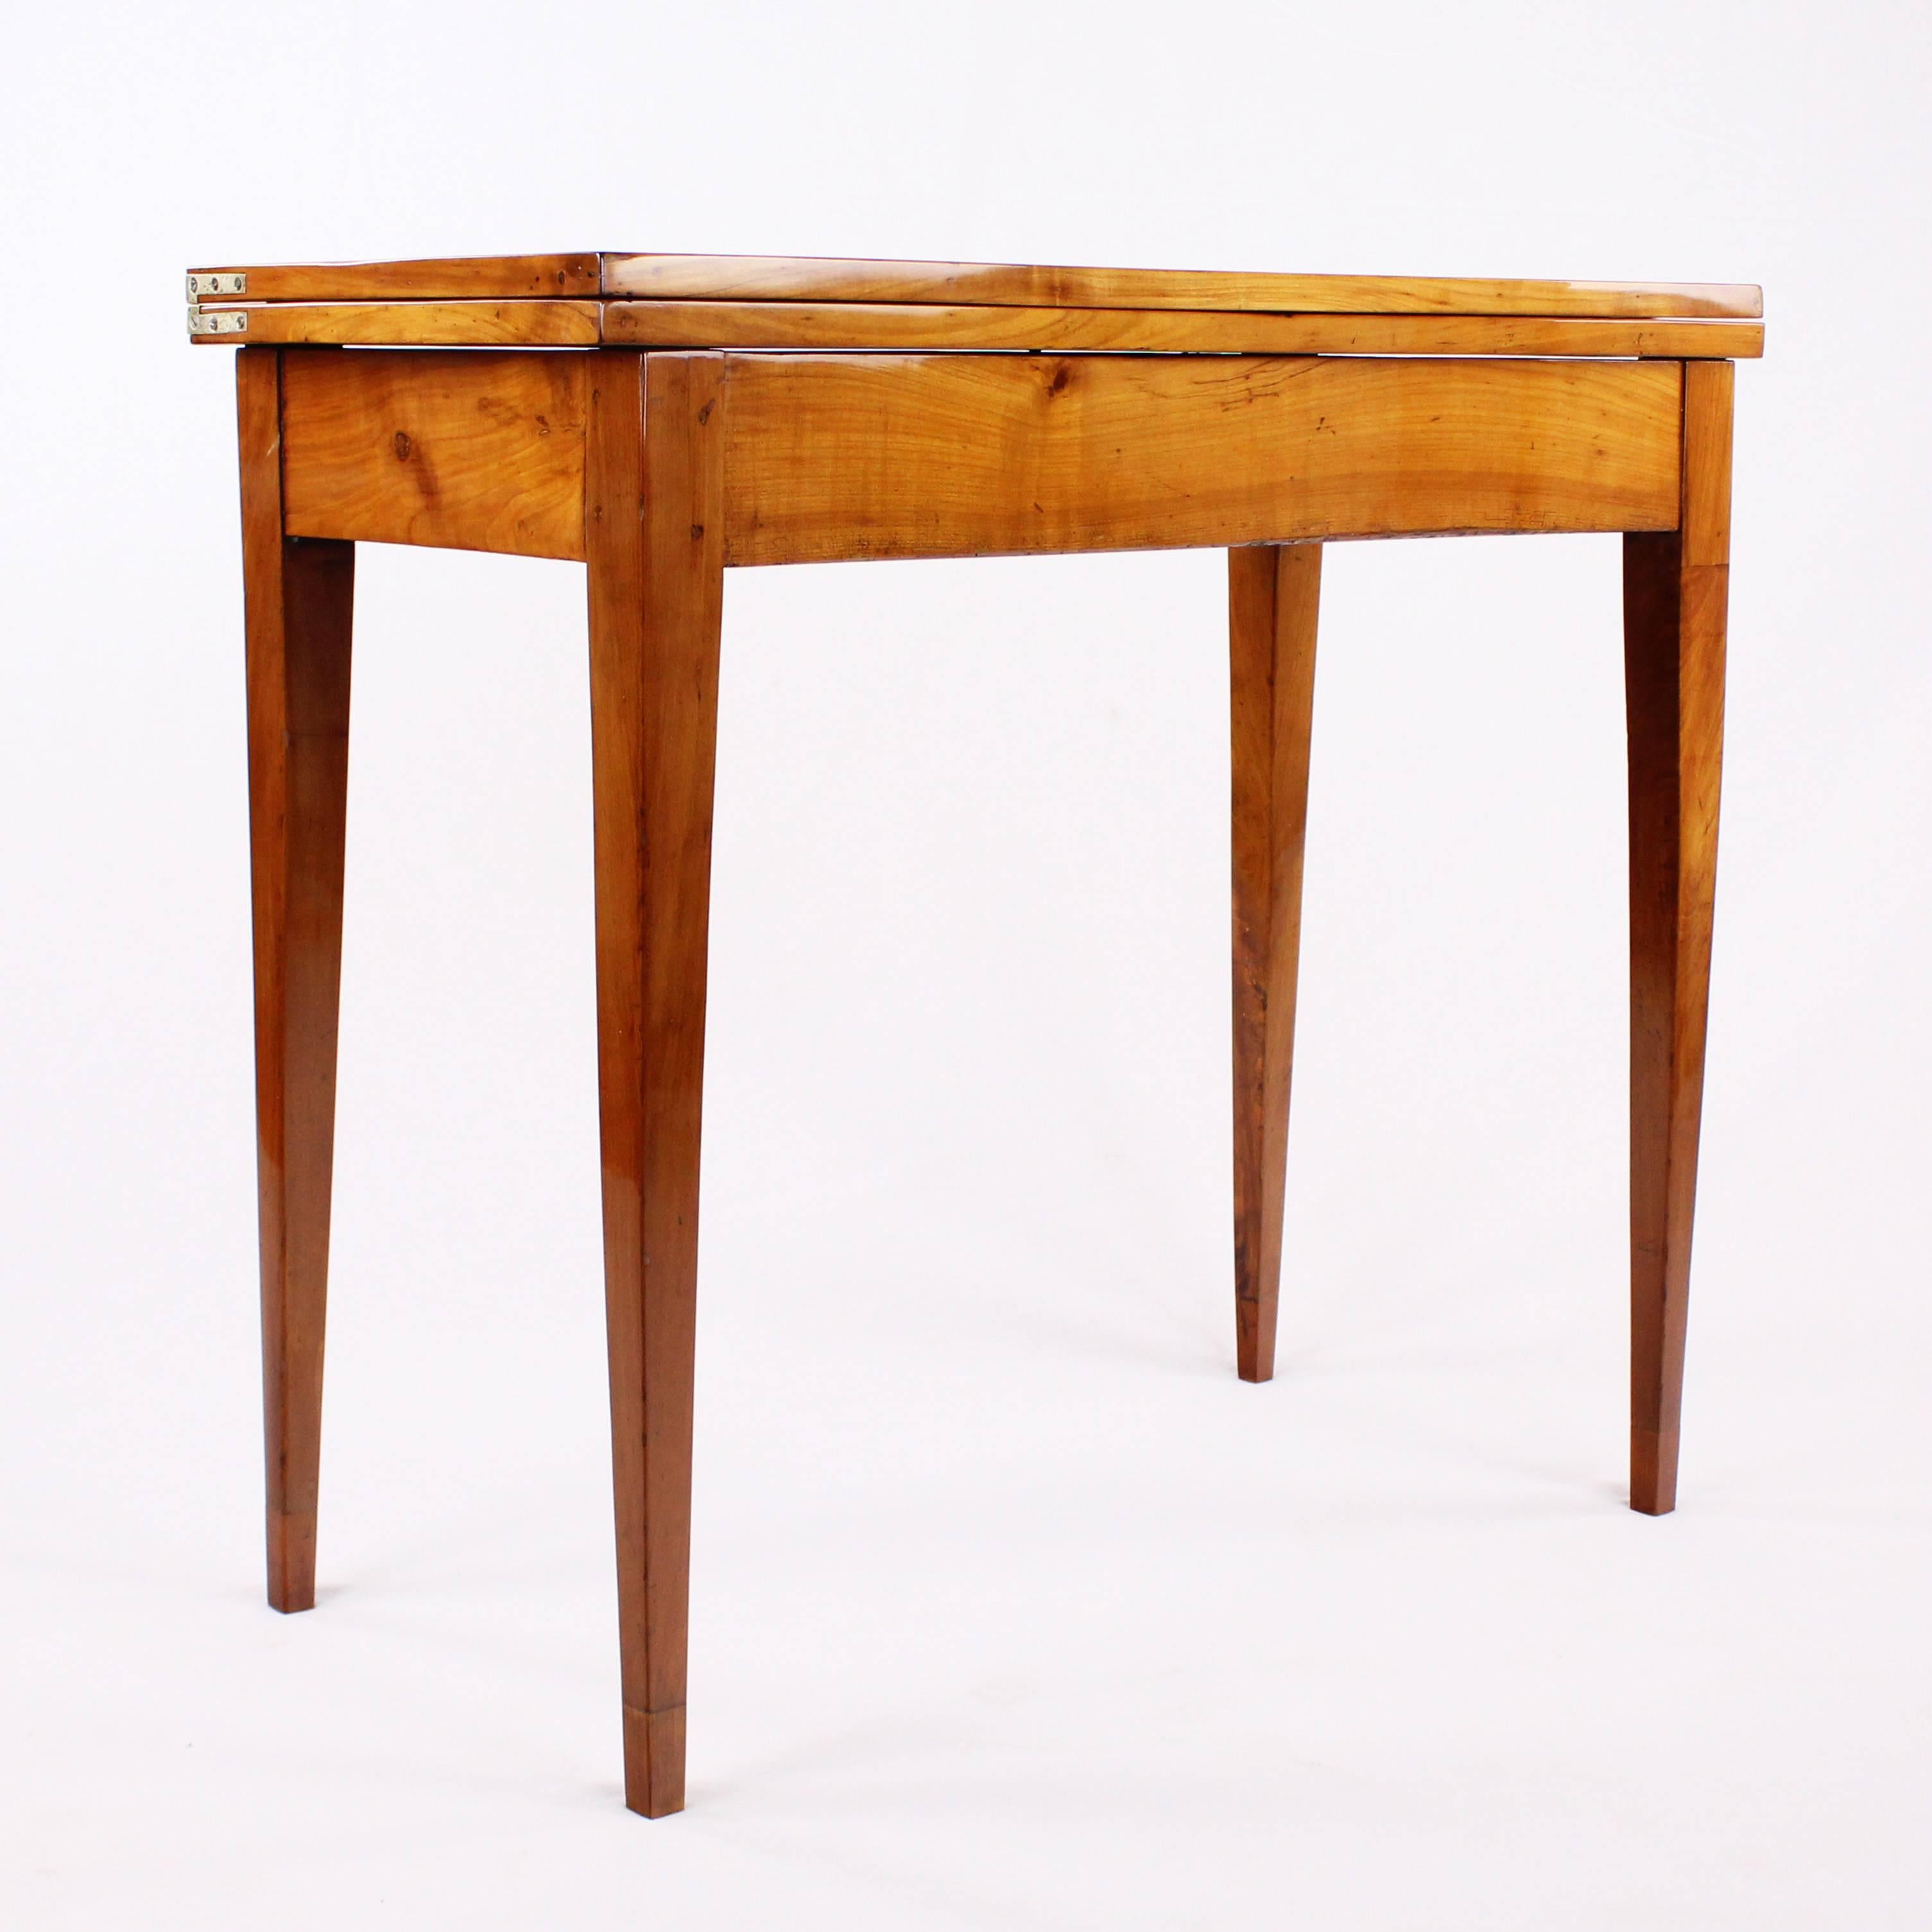 Foldable Table, Biedermeier, Cherry Tree, circa 1830-1840, Leather Inside In Excellent Condition In Muenster, NRW